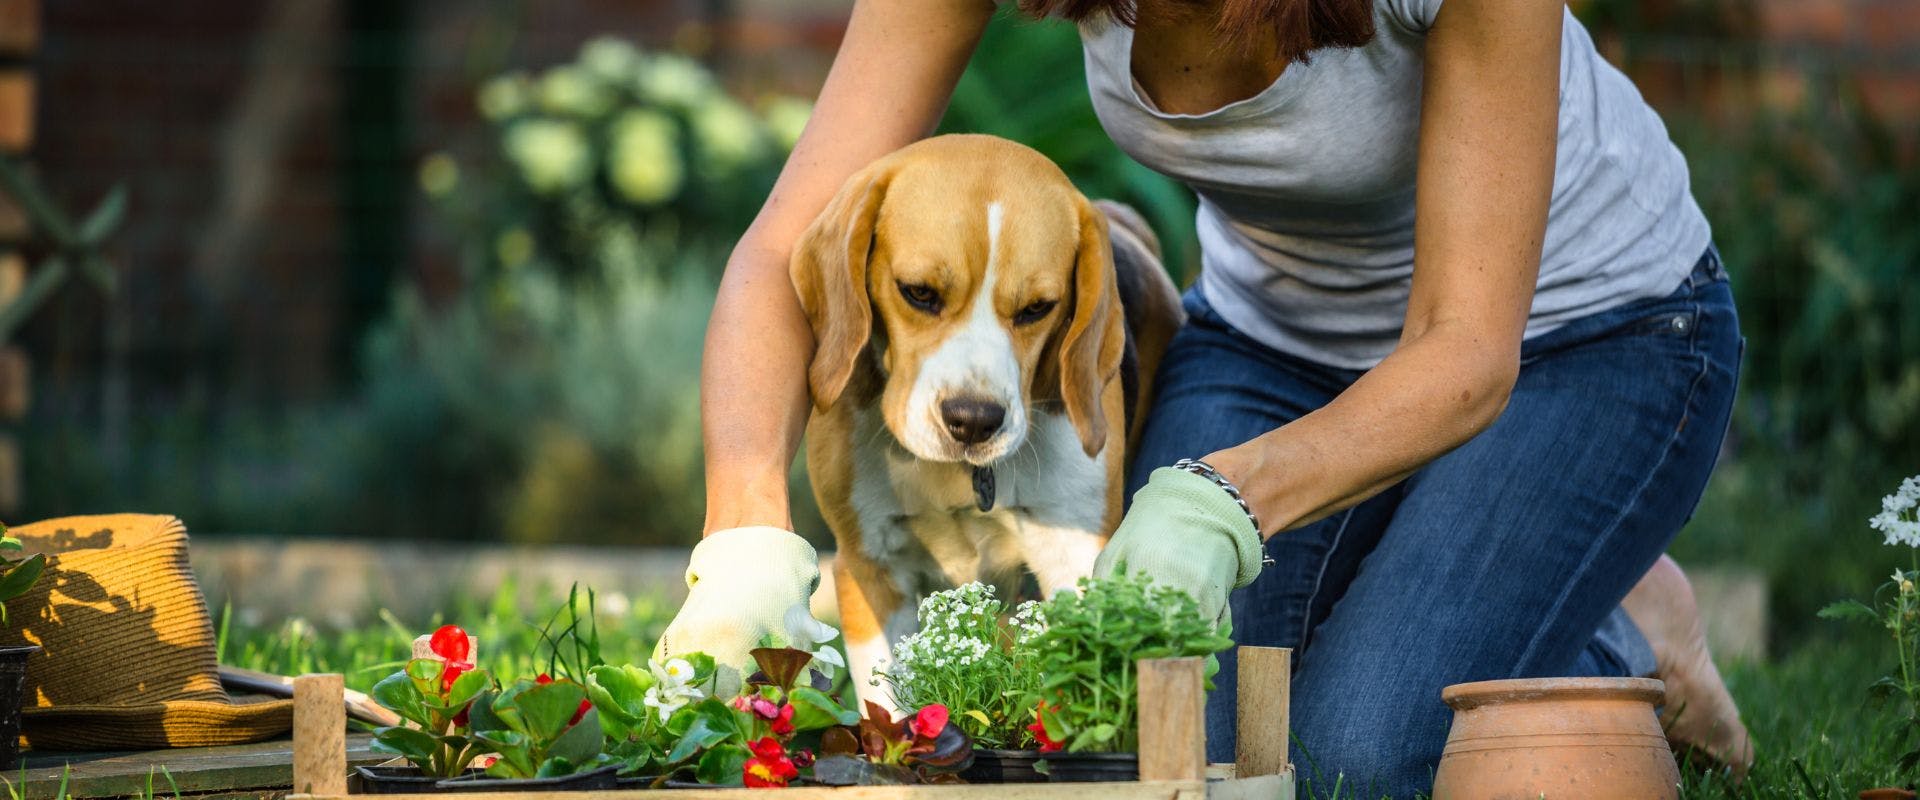 Beagle sat with owner while gardening